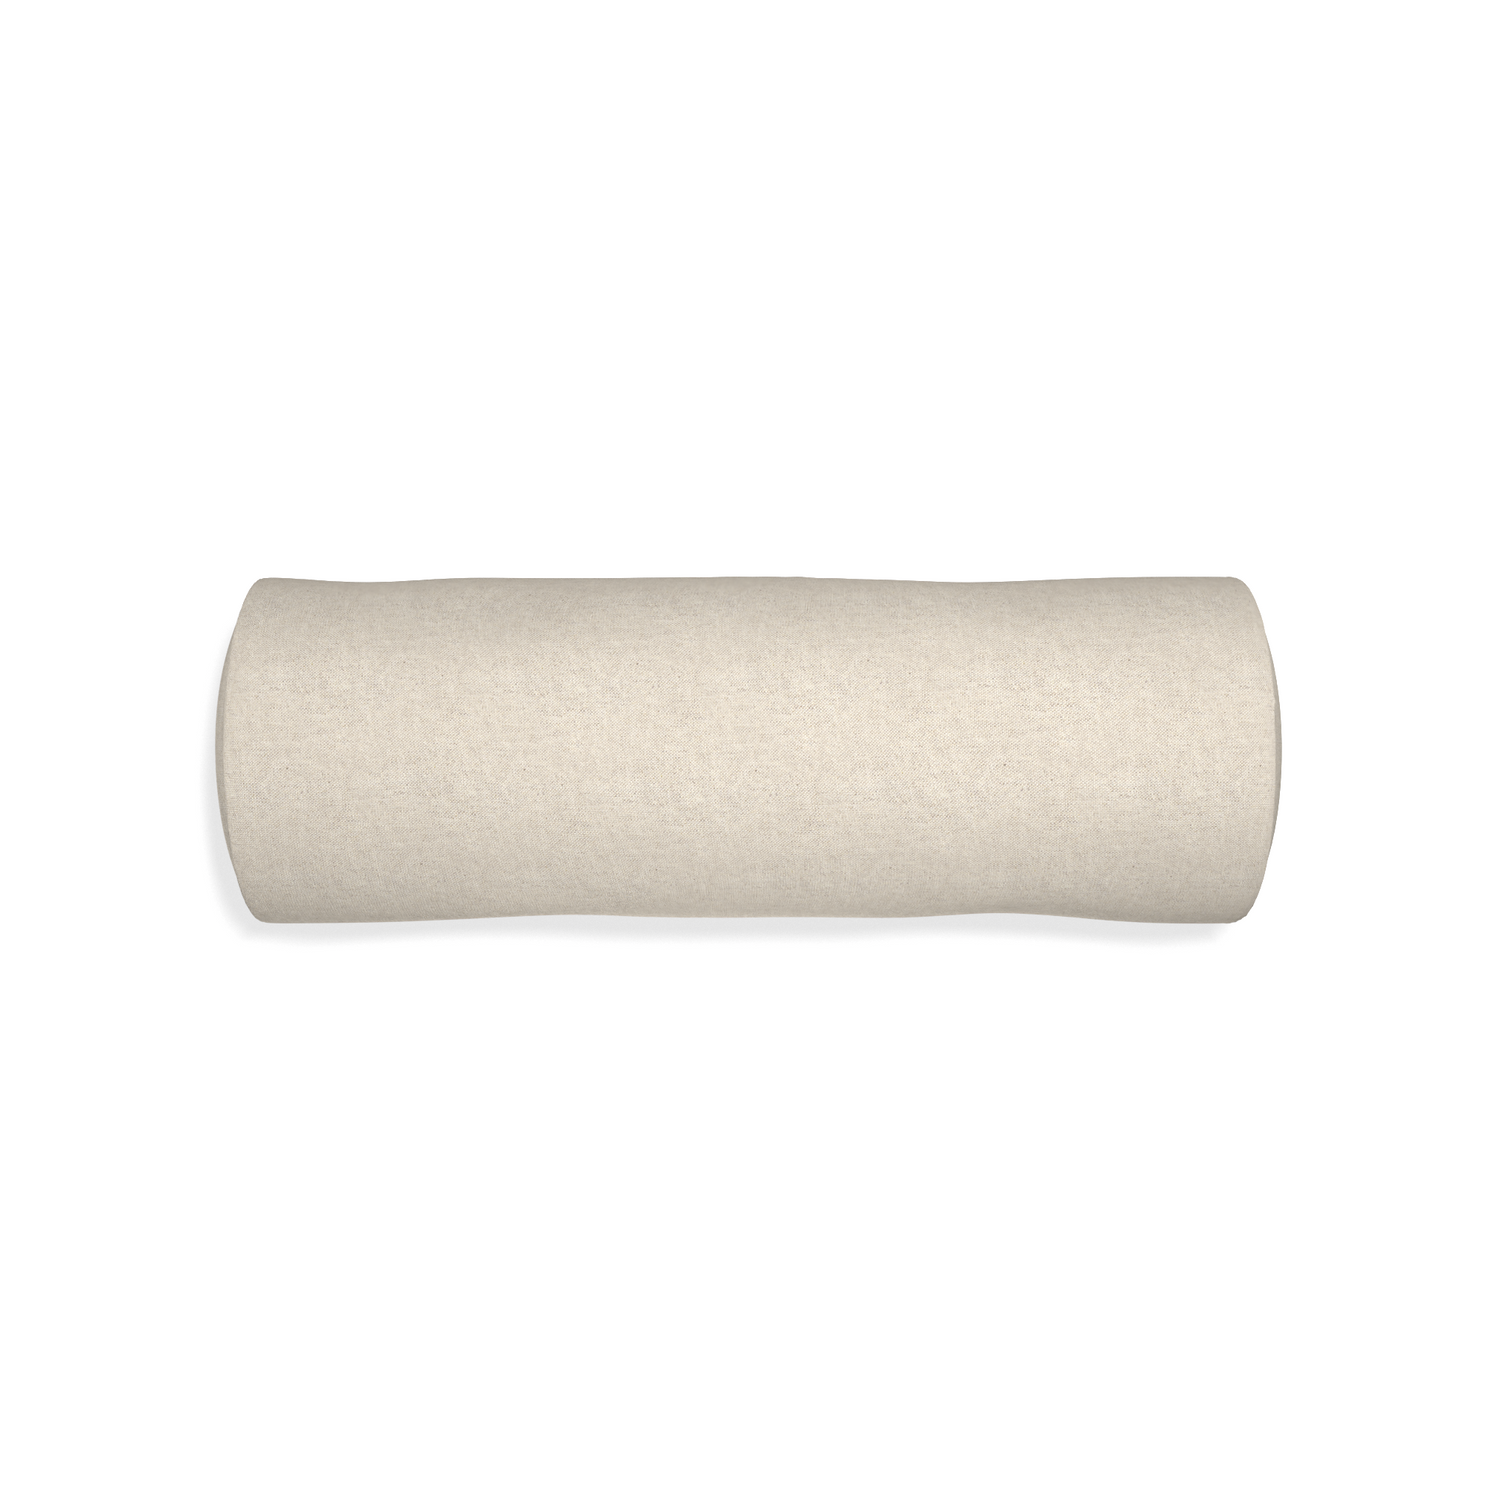 Bolster oat custom light brownpillow with none on white background